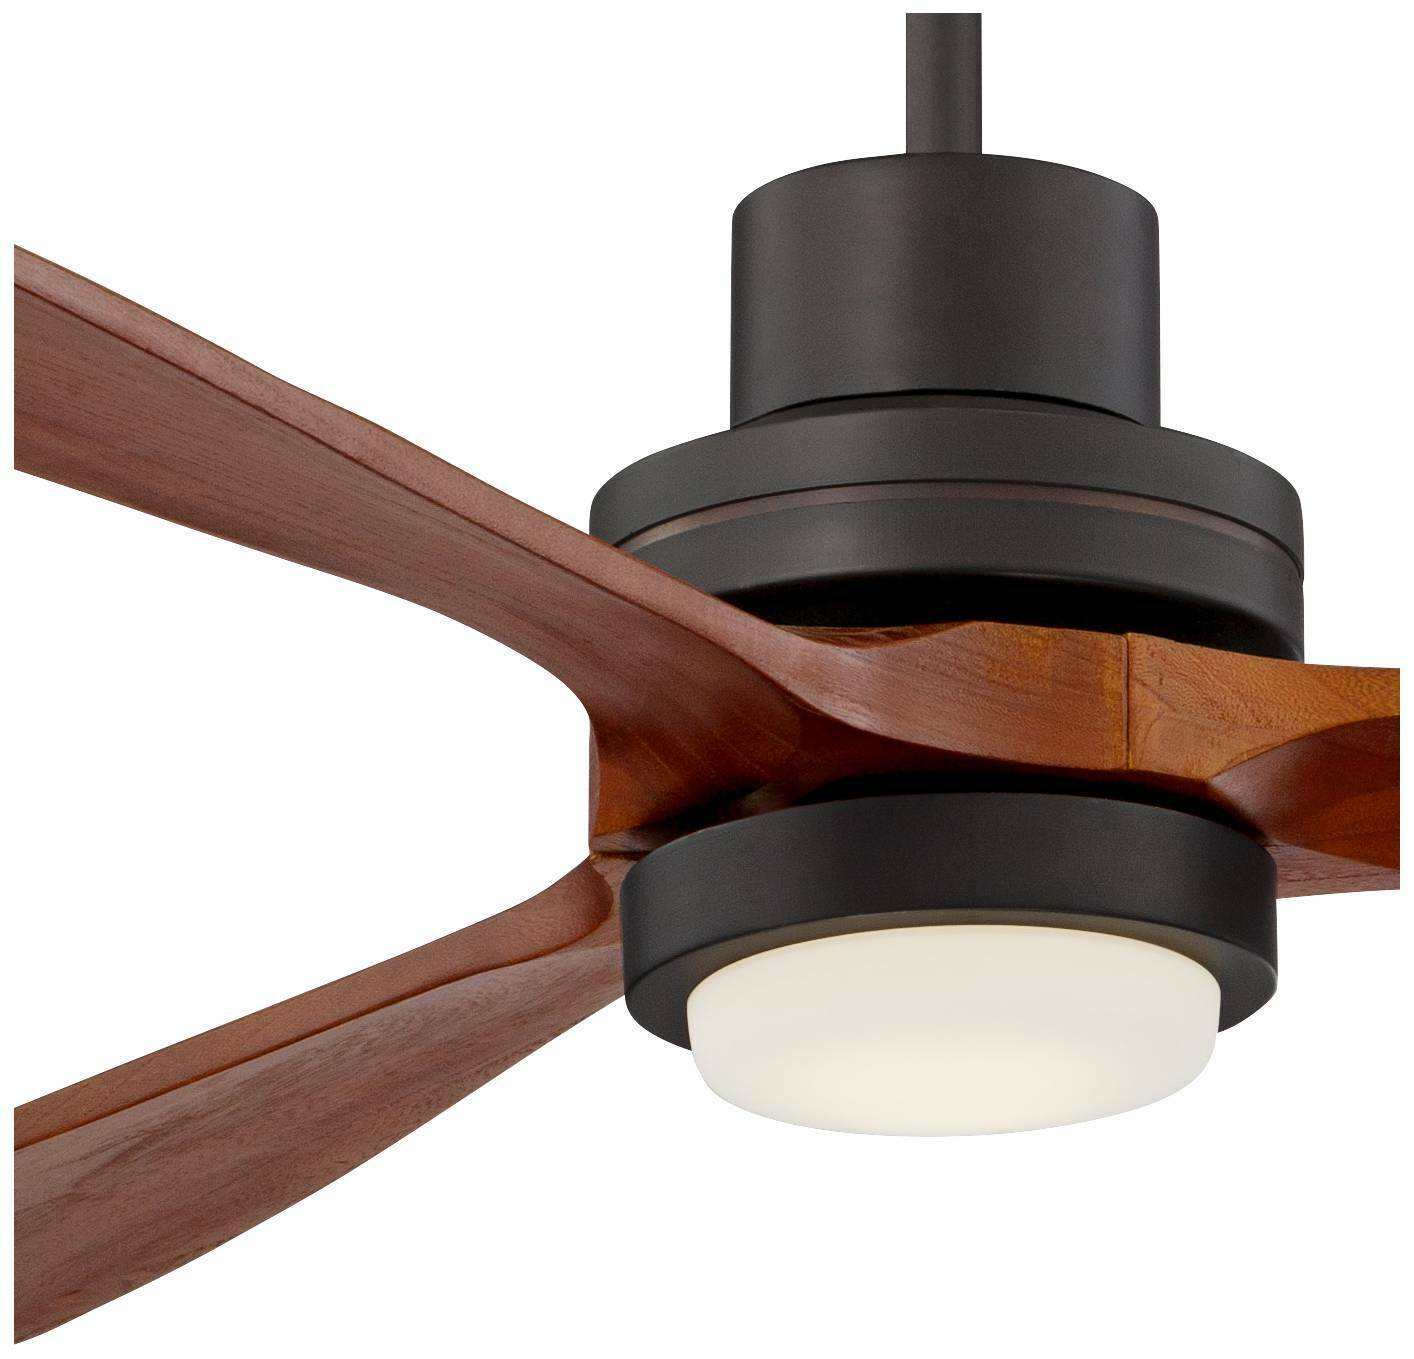 66 Modern Wood Ceiling Fan With Light Led Bronze Opal Glass For Living Room with regard to proportions 1414 X 1359